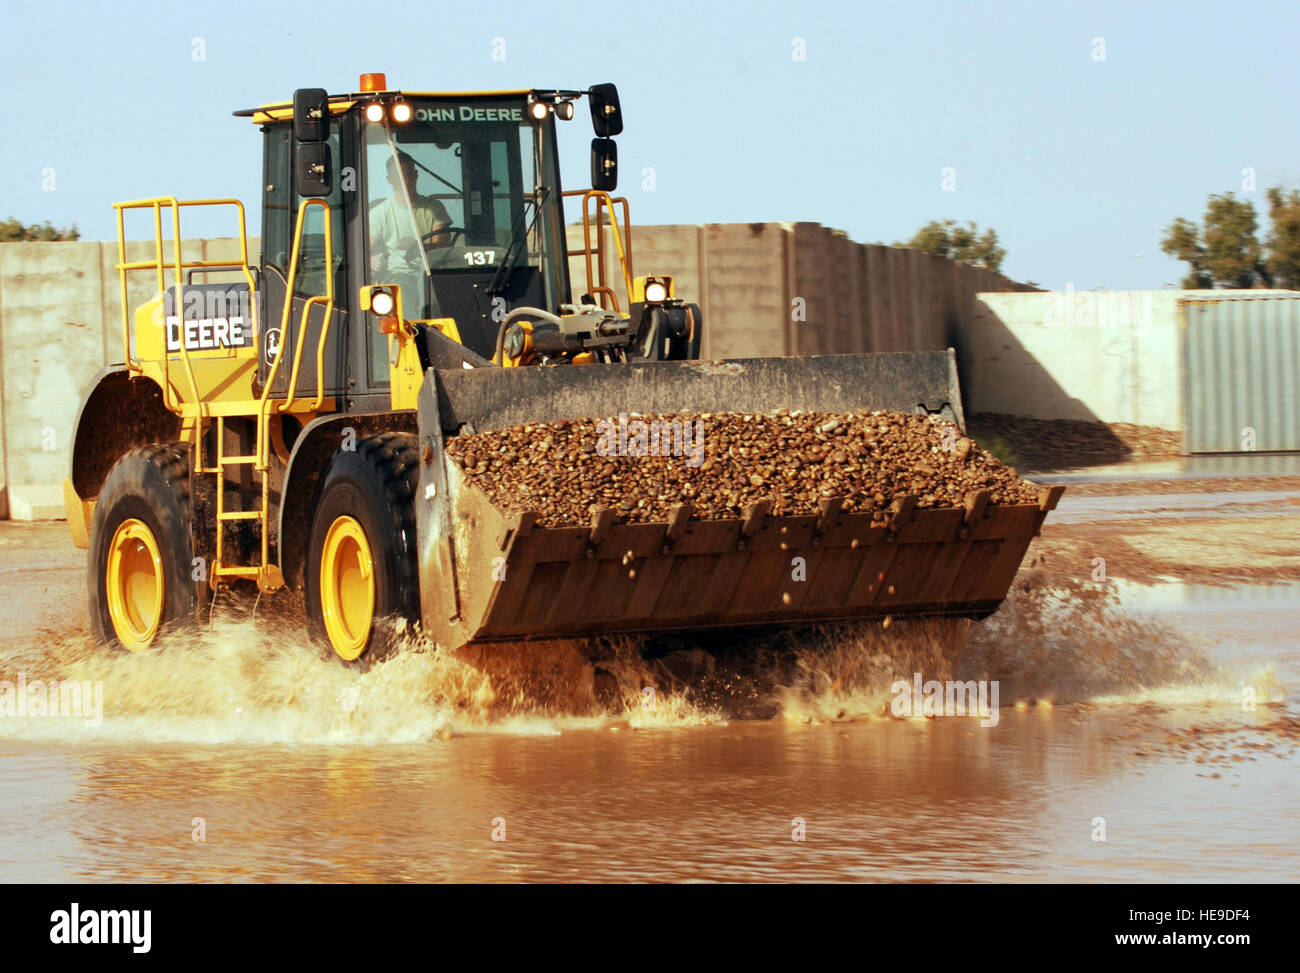 A front end loader plows through a flooded area of Joint Base Balad, Iraq, with a load of rock to build up low areas Oct. 25. Because rain is infrequent in Iraq, when it does rain, the hardened ground soaks up little water. Tech. Sgt. Erik Gudmundson) Stock Photo